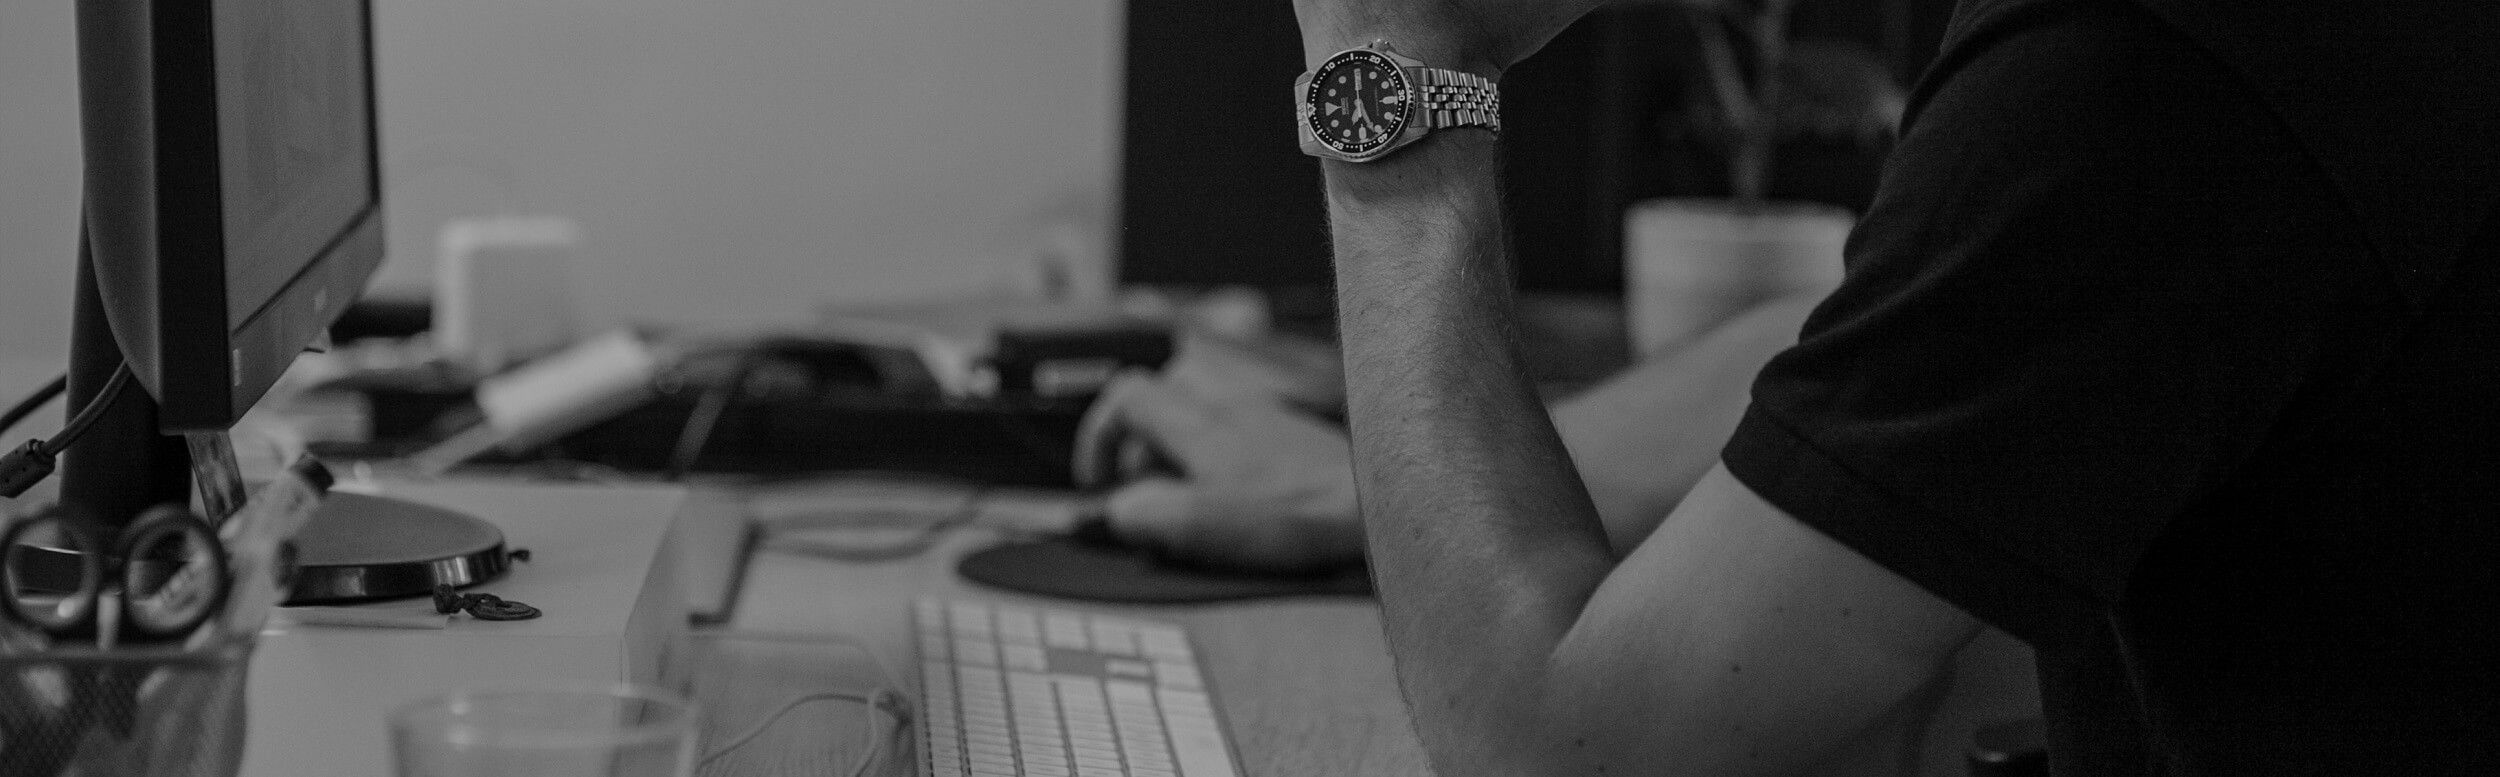 man working on the computer detail on watch